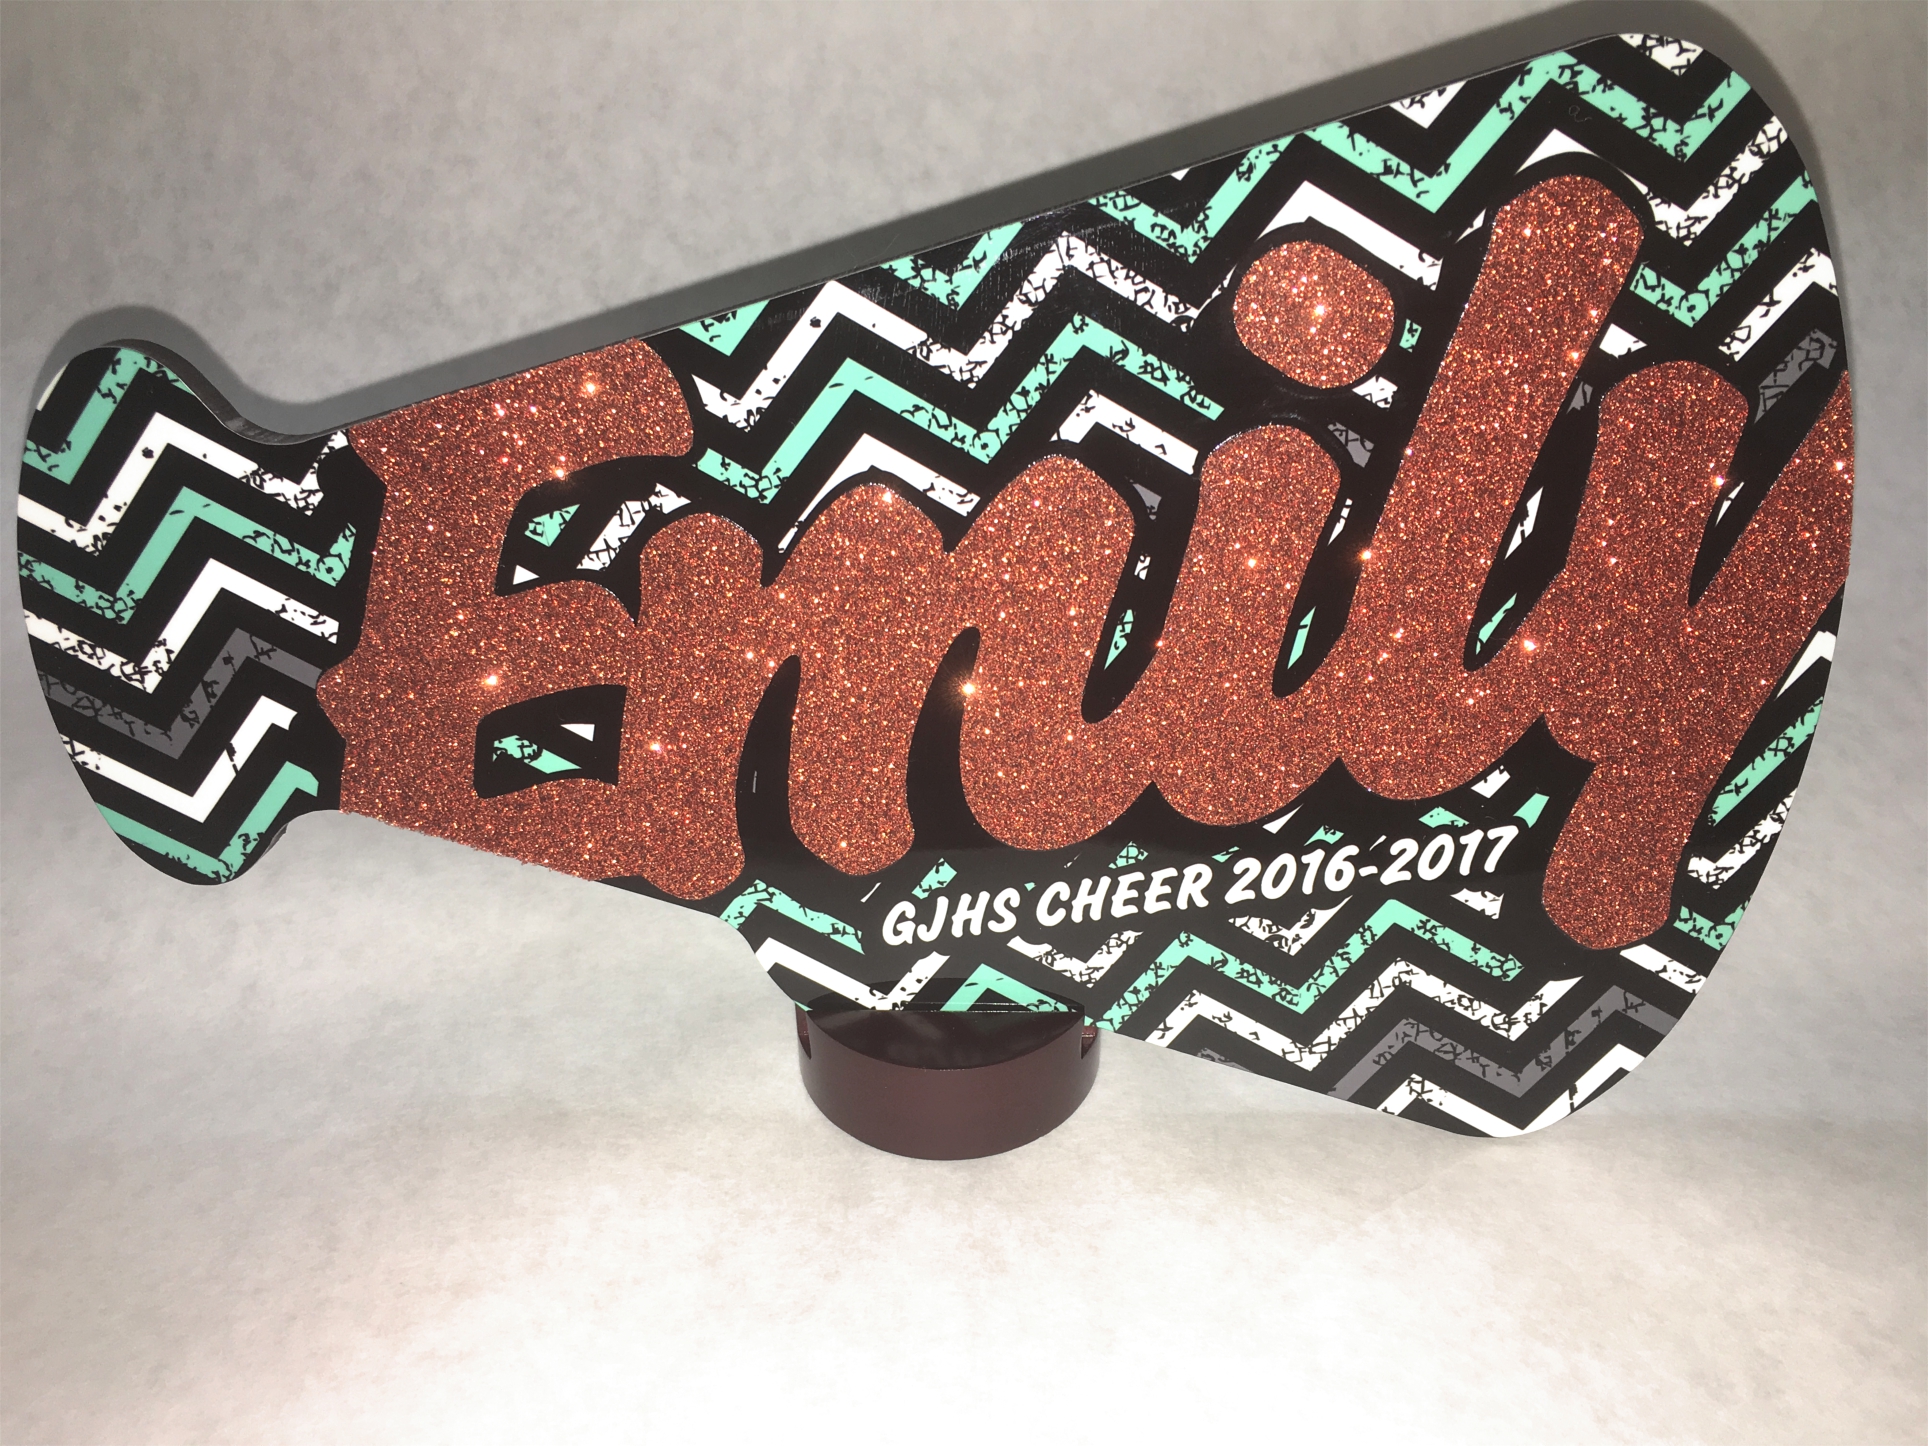 Glitter Megaphone made with sublimation printing